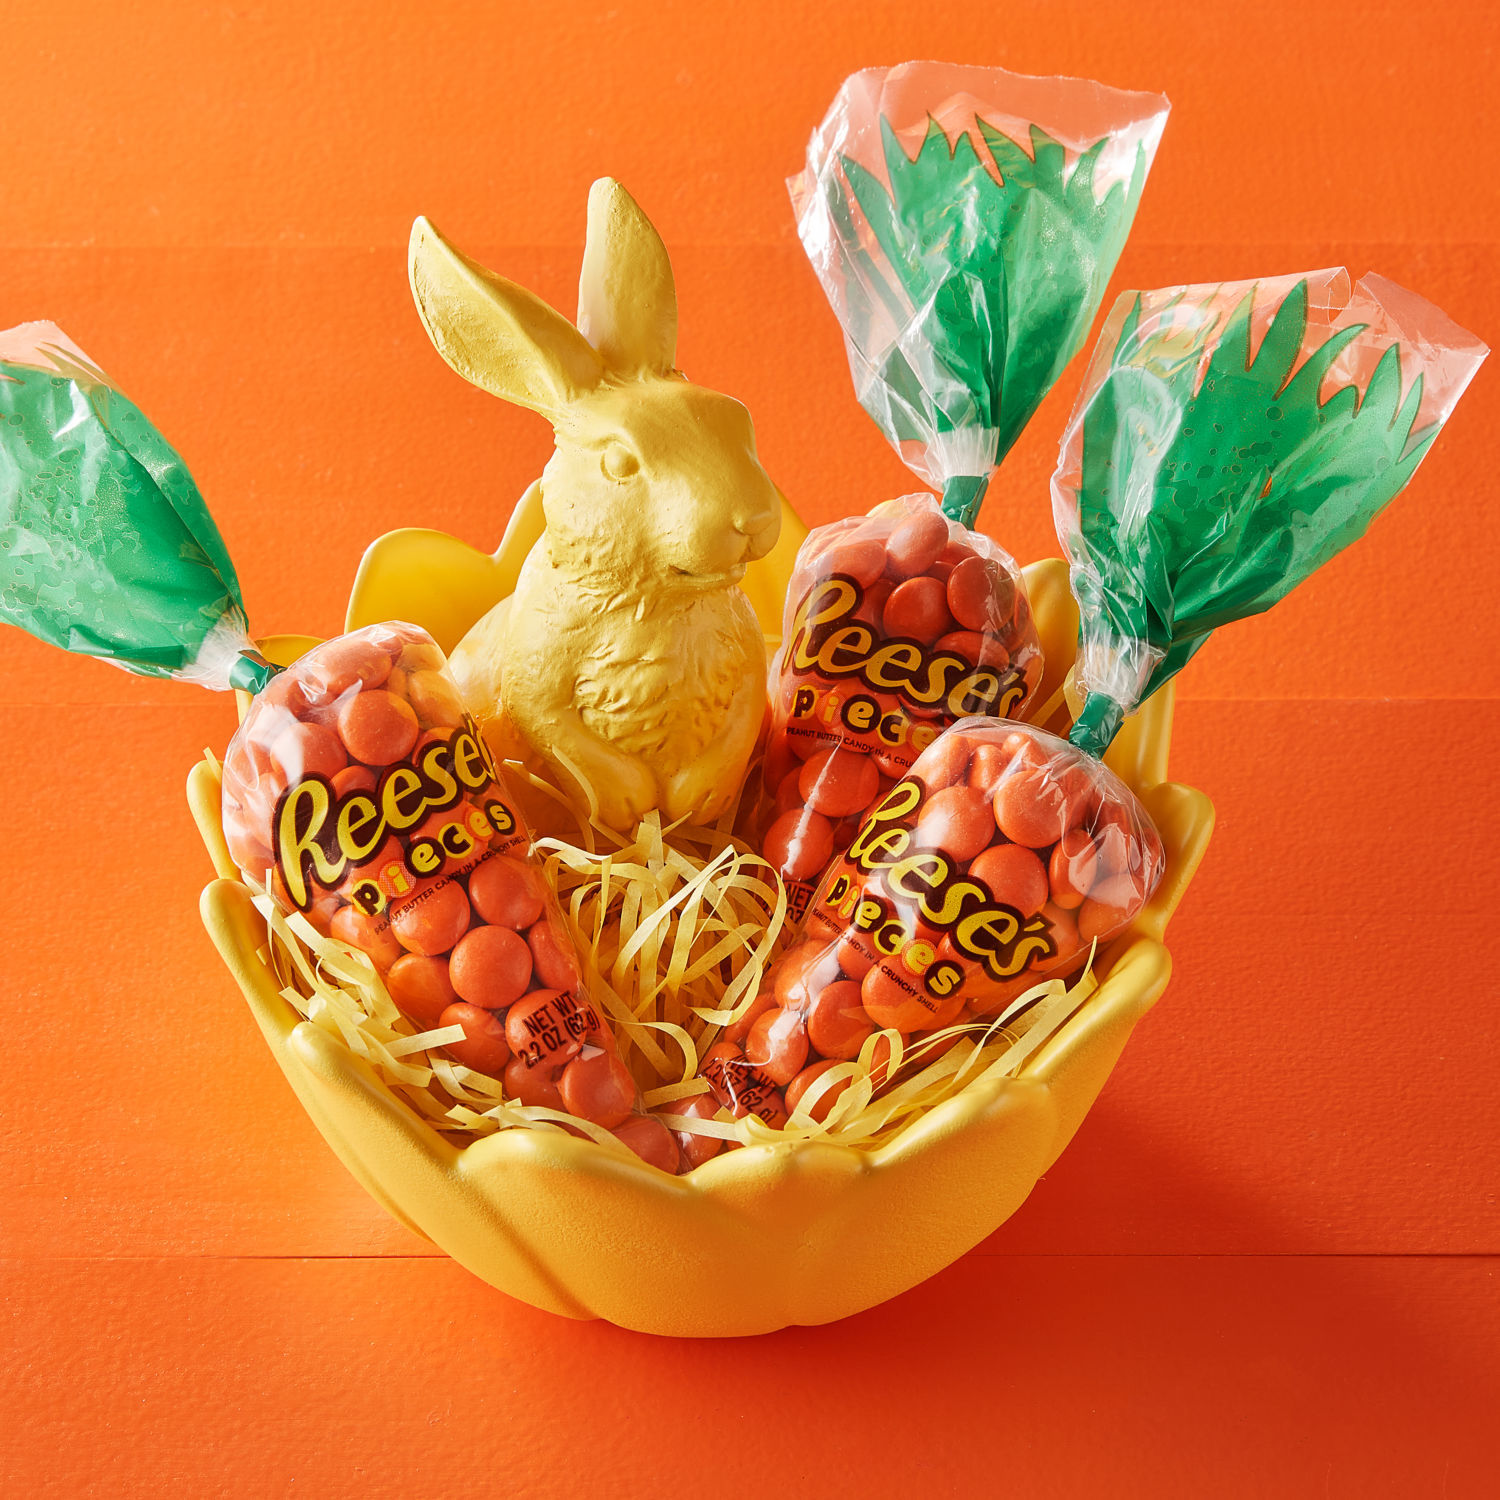 REESE'S, PIECES Peanut Butter in a Crunchy Shell Treats, Easter Candy, 2.2 oz, Carrot Bag - image 5 of 6